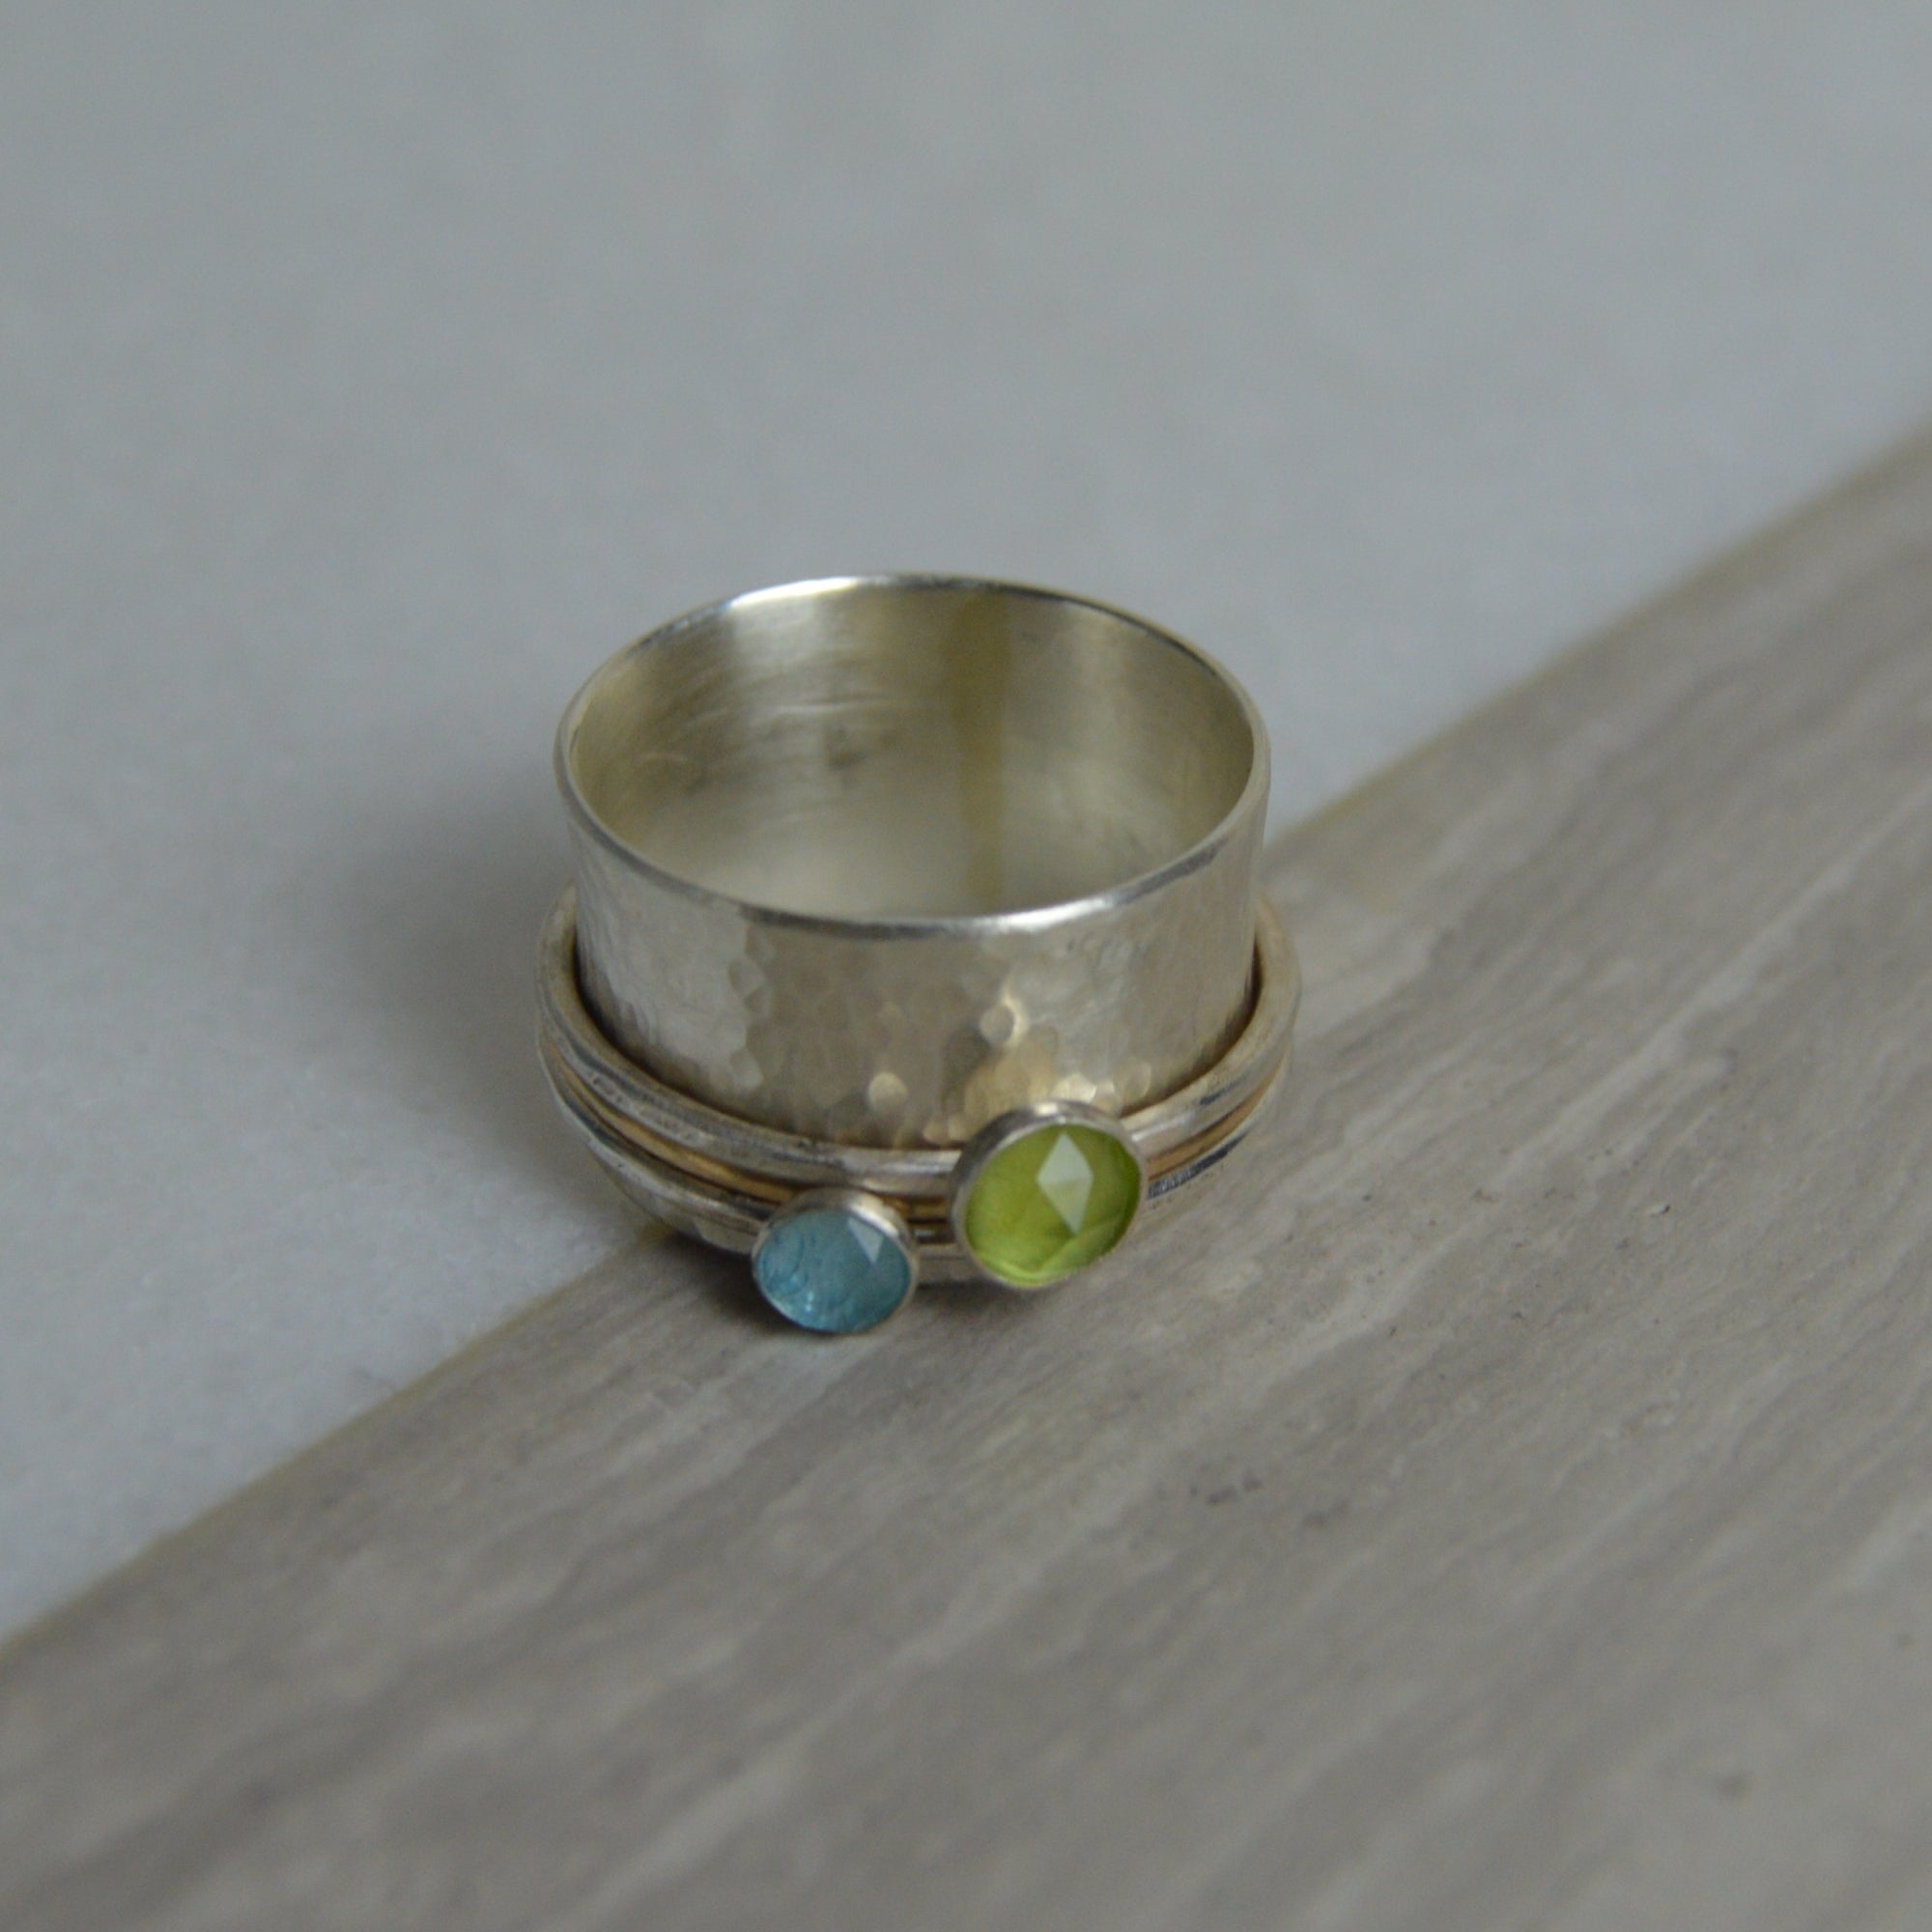 Peridot & Topaz Spinning Ring - Made to order - The Nancy Smillie Shop - Art, Jewellery & Designer Gifts Glasgow